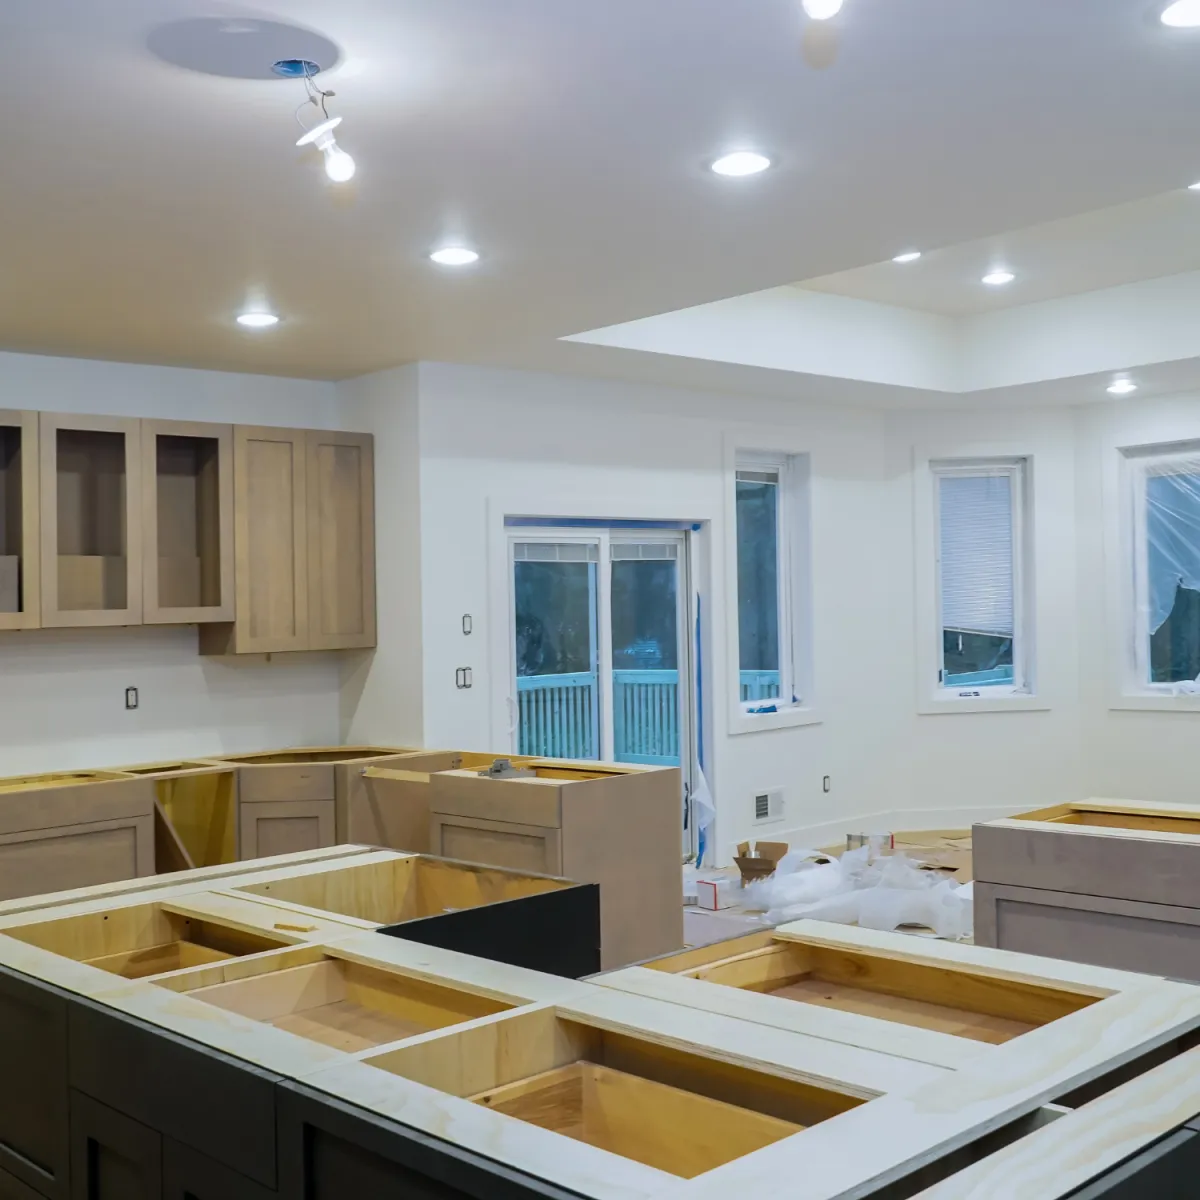 Hand In Hand residential kitchen countertop renovation in Dallas Fort Worth Texas